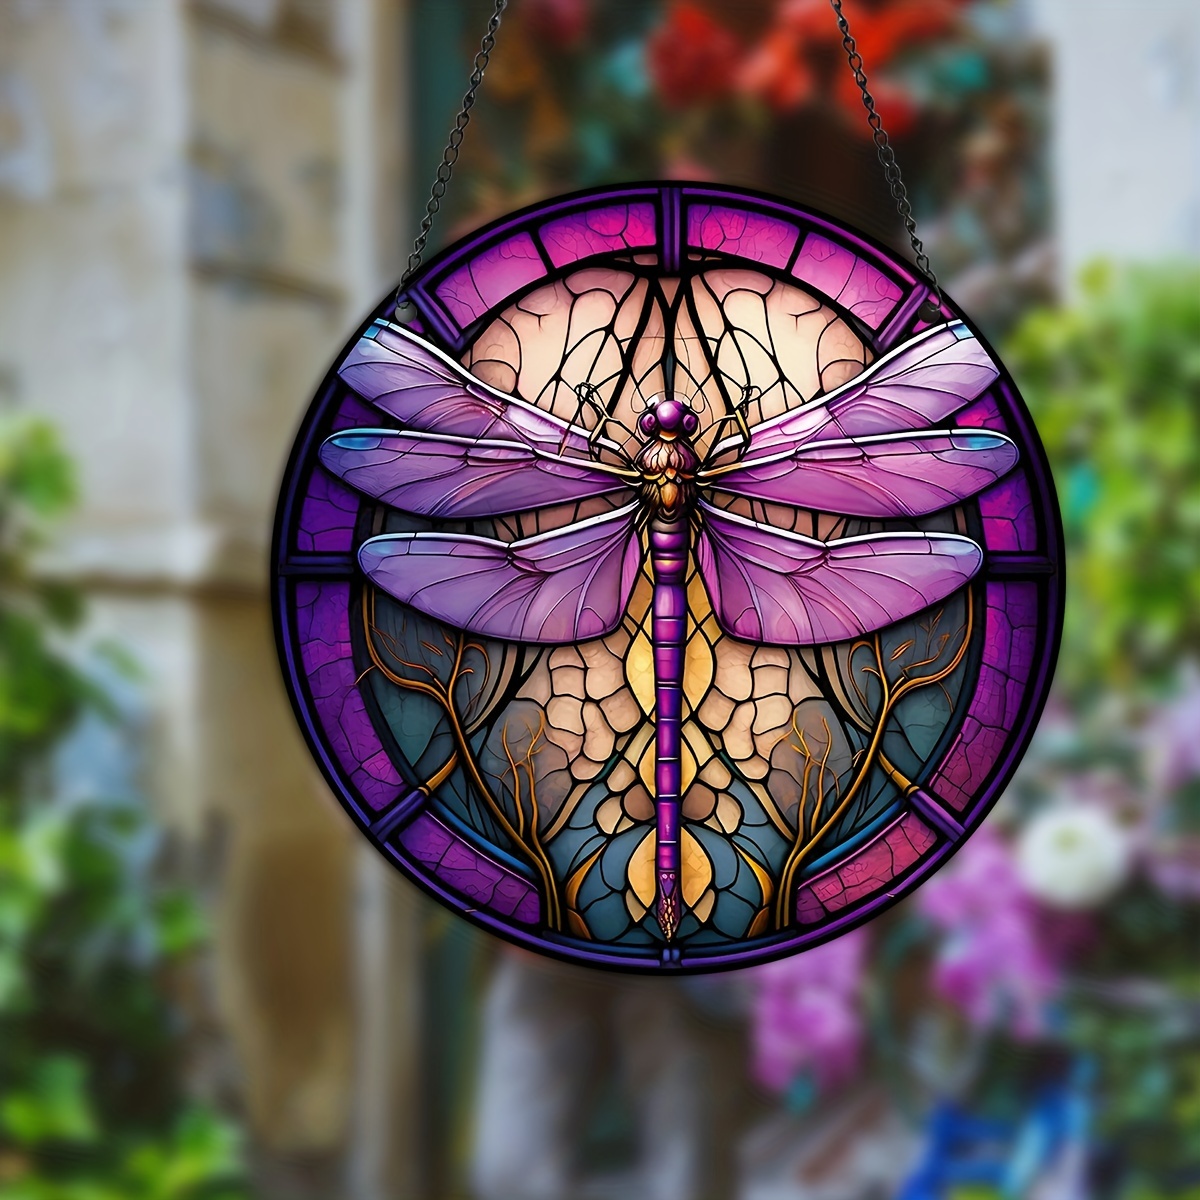 Stained Glass Art Suncatcher Window Hangings Dragonfly Gift Home Decor 